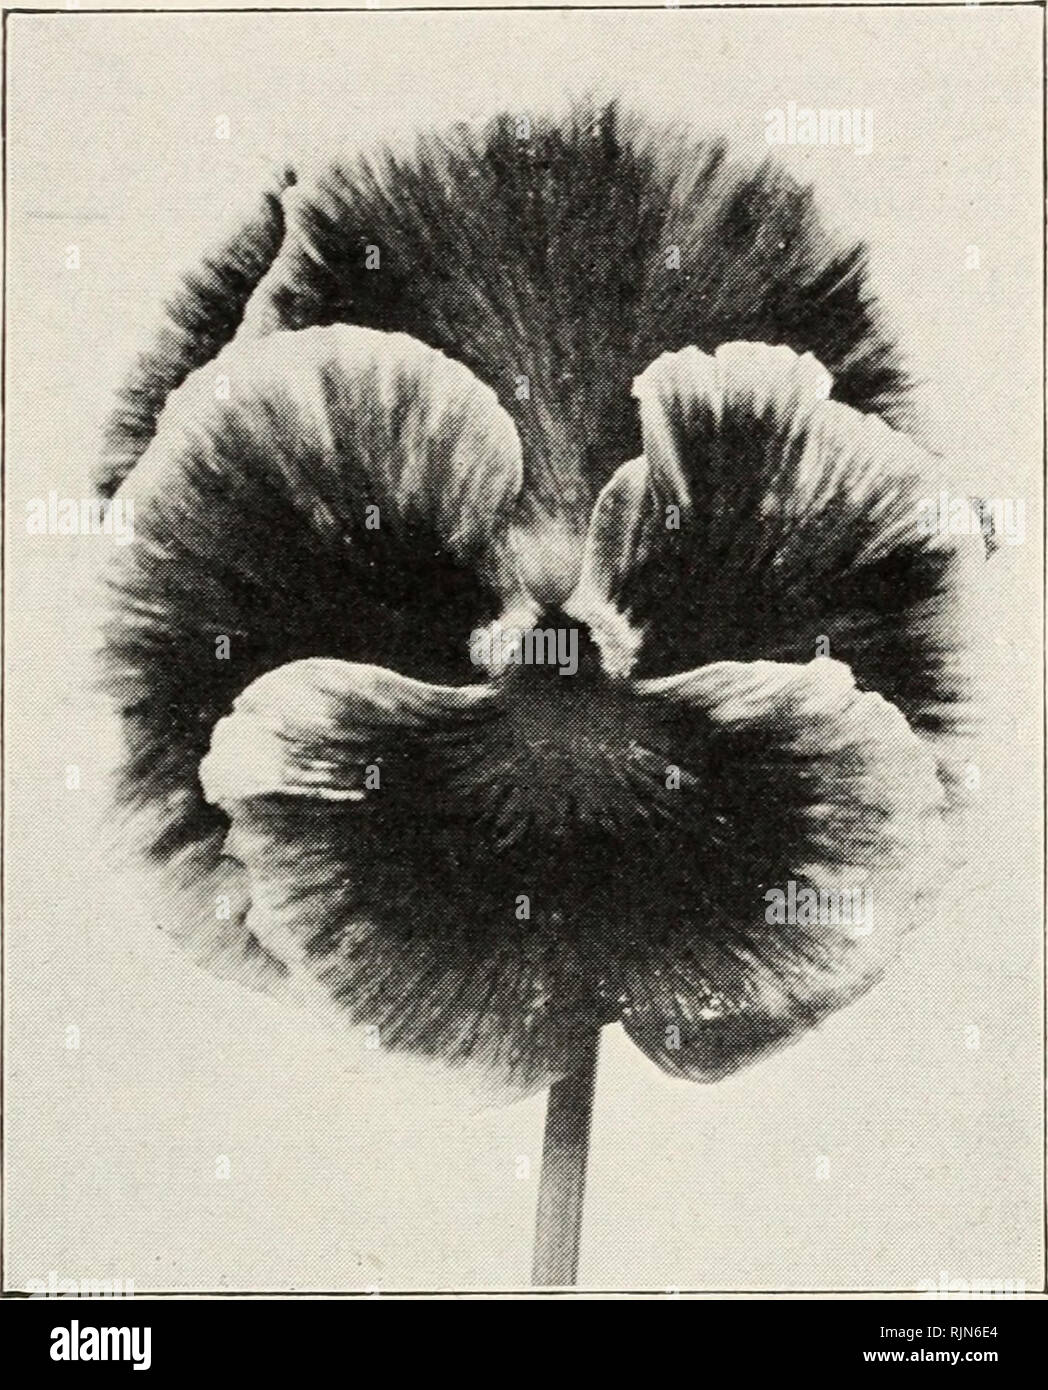 . Barnard's 1925 wholesale florist catalog : flower seeds supplies bulbs. Seeds Catalogs; Flowers Seeds Catalogs; Nurseries (Horticulture) Catalogs; Gardening Equipment and supplies Catalogs. Barnard's Florists' Price List—Spring, 1925 13 T. Pkt. Oz. NICOTIANA Affinis hybrids $0.10 $0.40 Sanderea hybrids. Carmine-red 10 .50 NIGEZ.I.A (A). Miss Jekyll. Long- stemmed flowers of a clear corn- flower-blue; good cut flower 15 .30 Mixed 10 .20 ansies. Type of Barnard's Florists Mixture Take care of the weakest looking seedlings, as they usually give the finest flowers. BABNABD'S &quot;PLORISTS&quot; Stock Photo